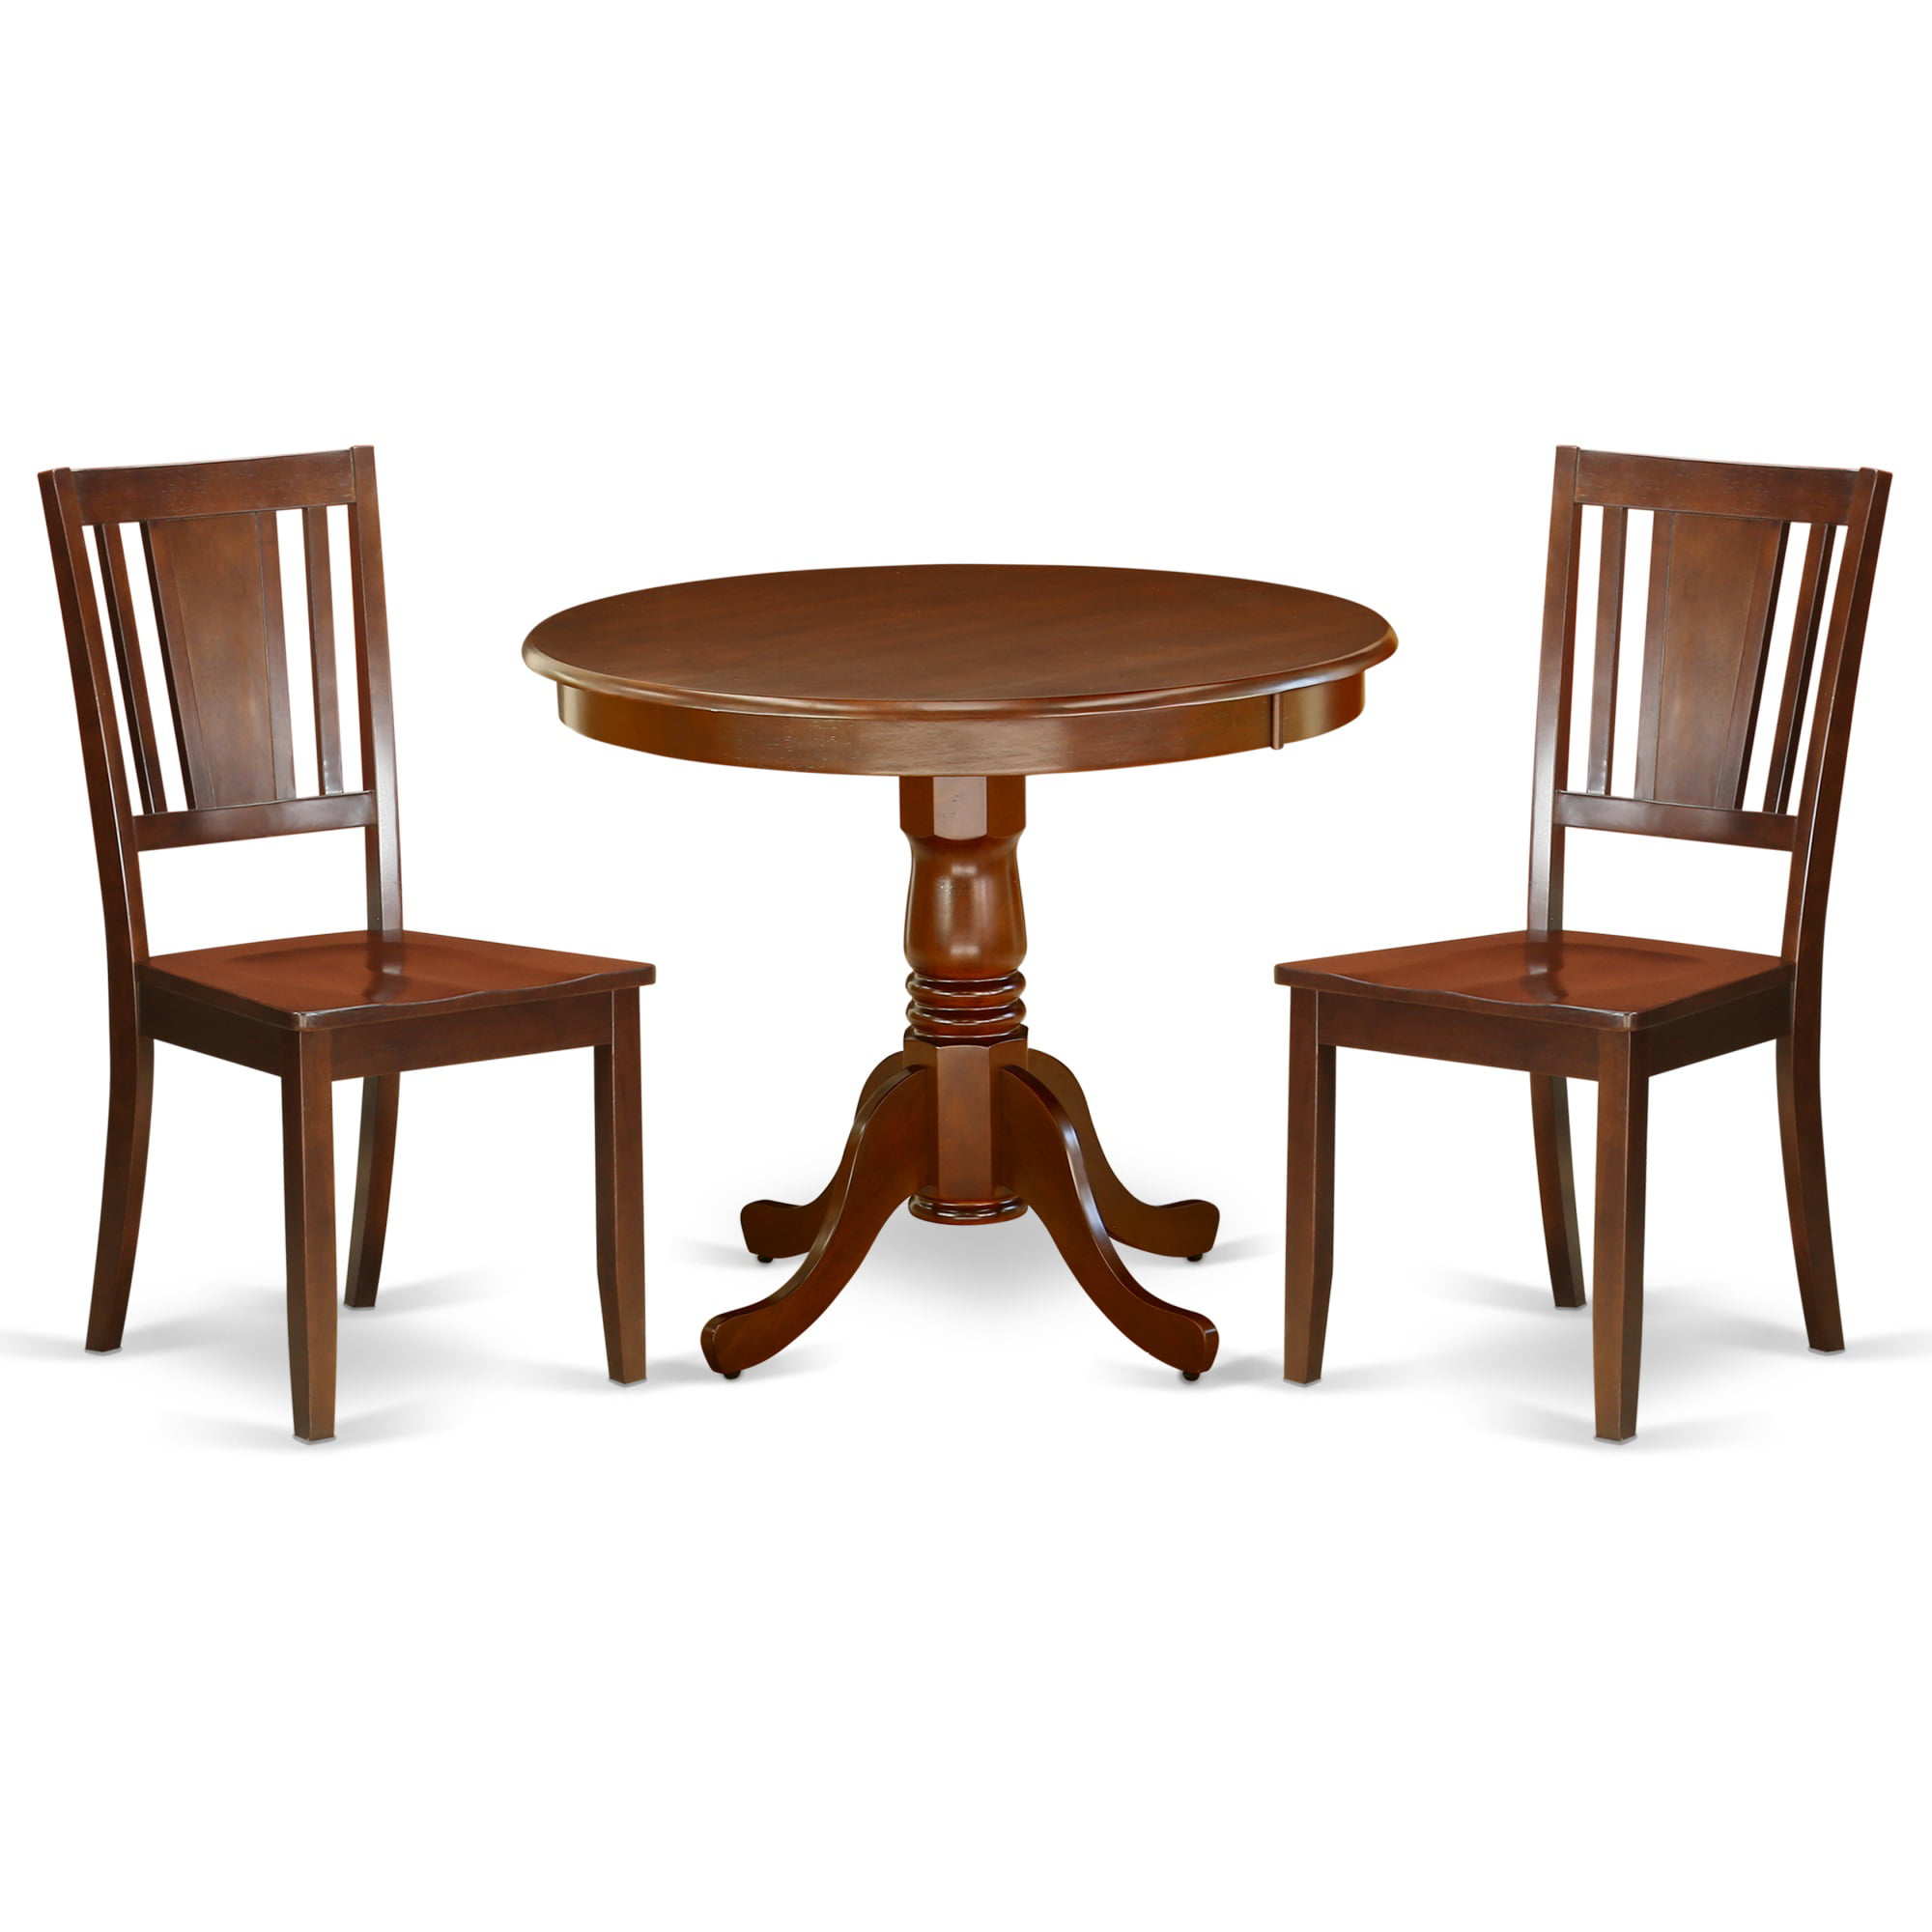 Dining Table And Two Wood Seat Chairs, 36 Inch Round Kitchen Table Set